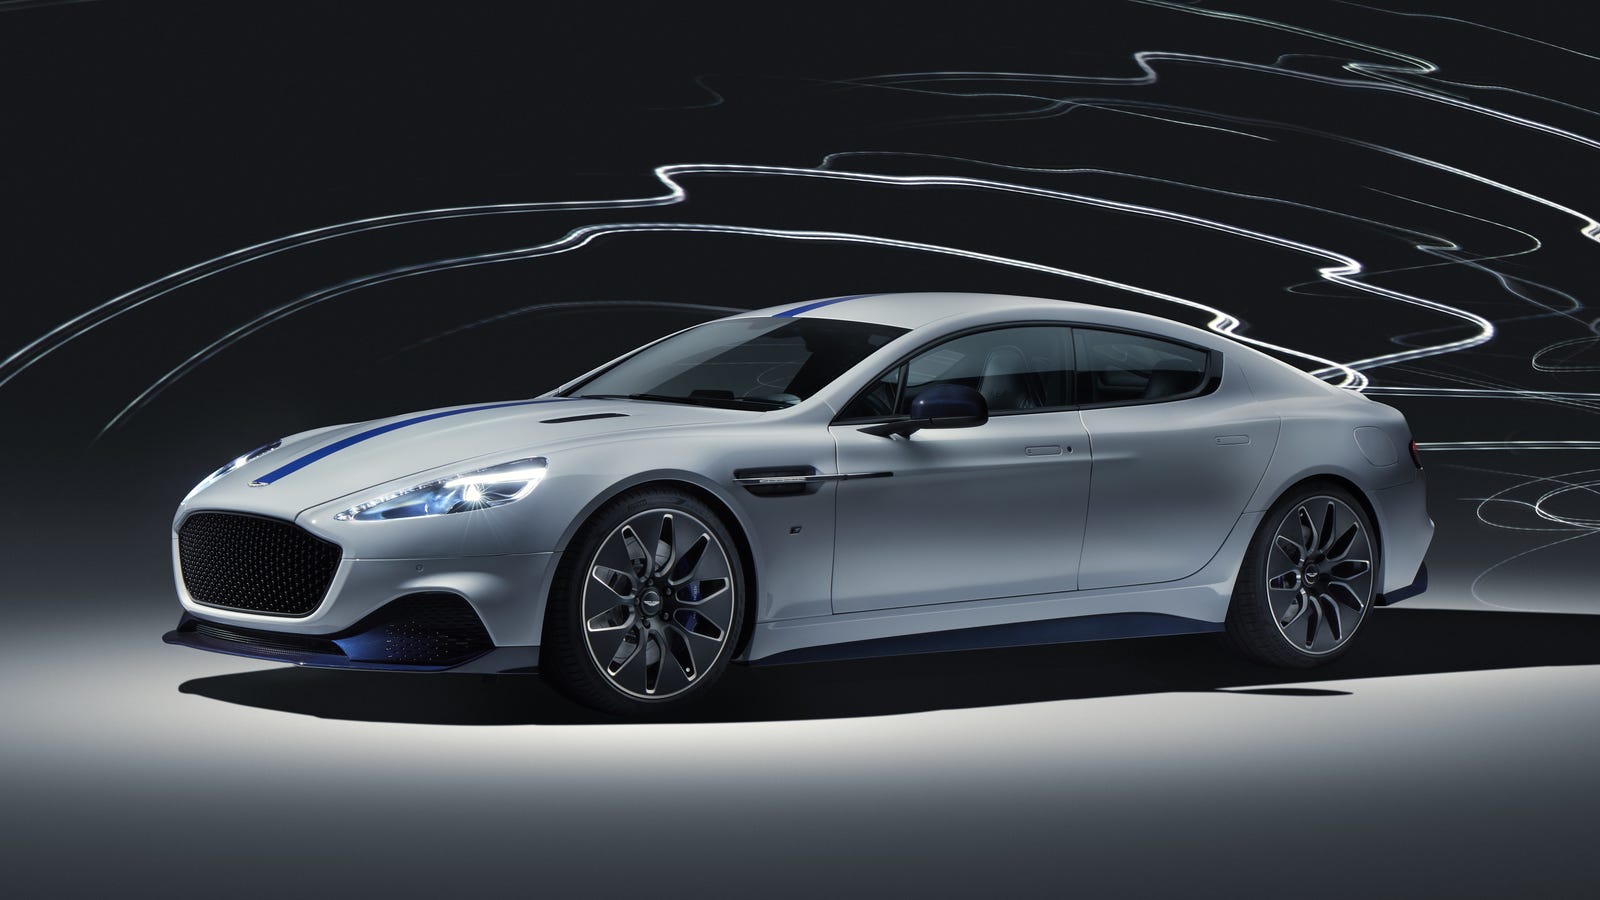 The 2020 Aston Martin Rapide E AllElectric Sedan Is Here with 600 HP